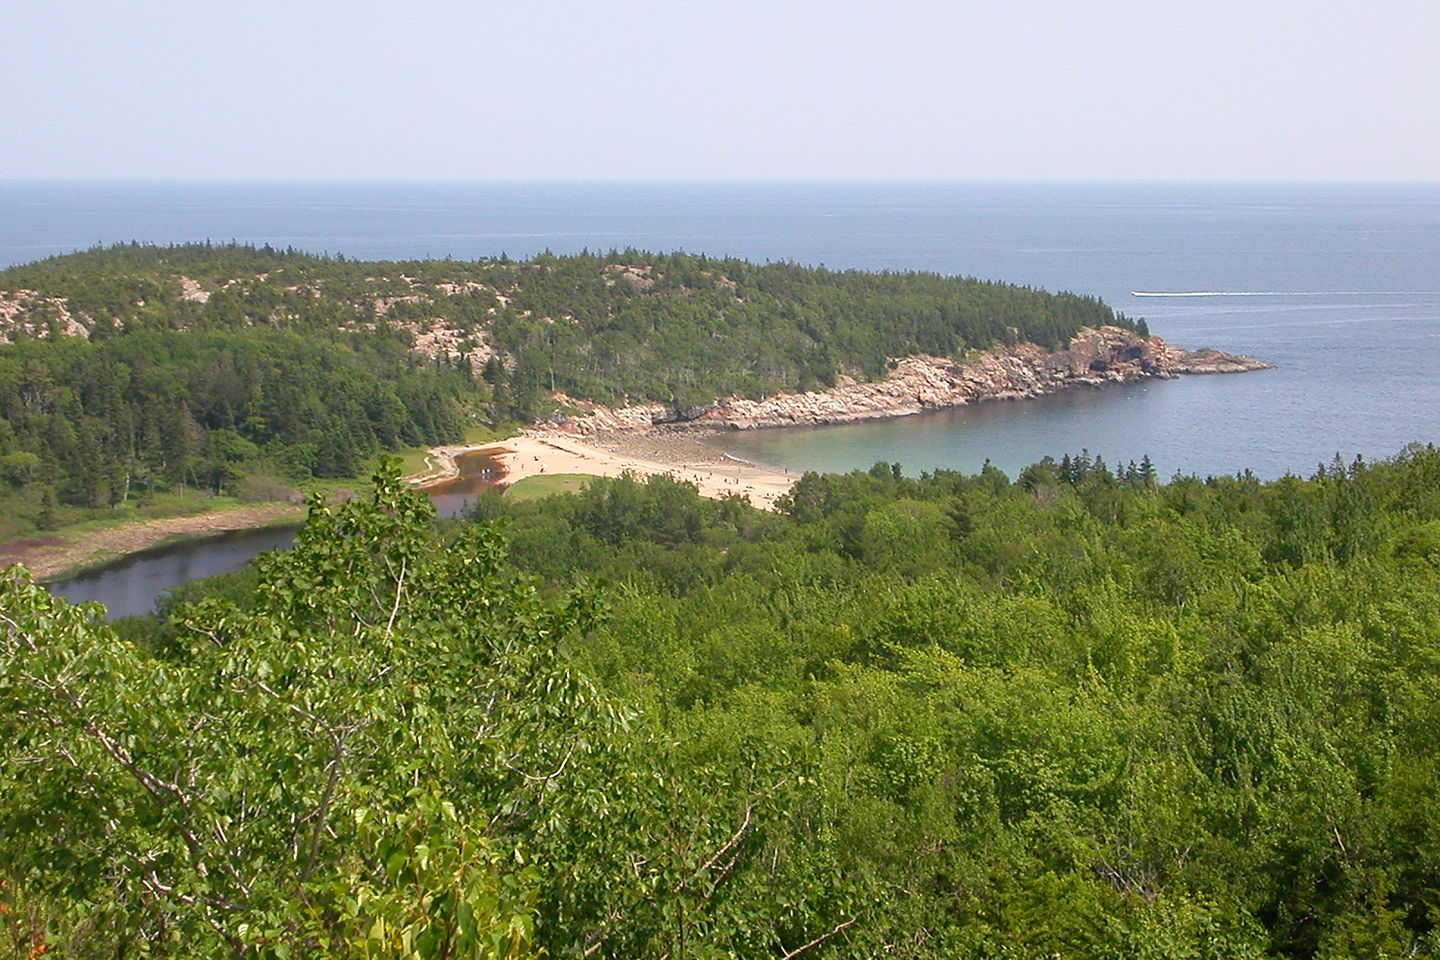 View of Sand Beach from summit of Beehive